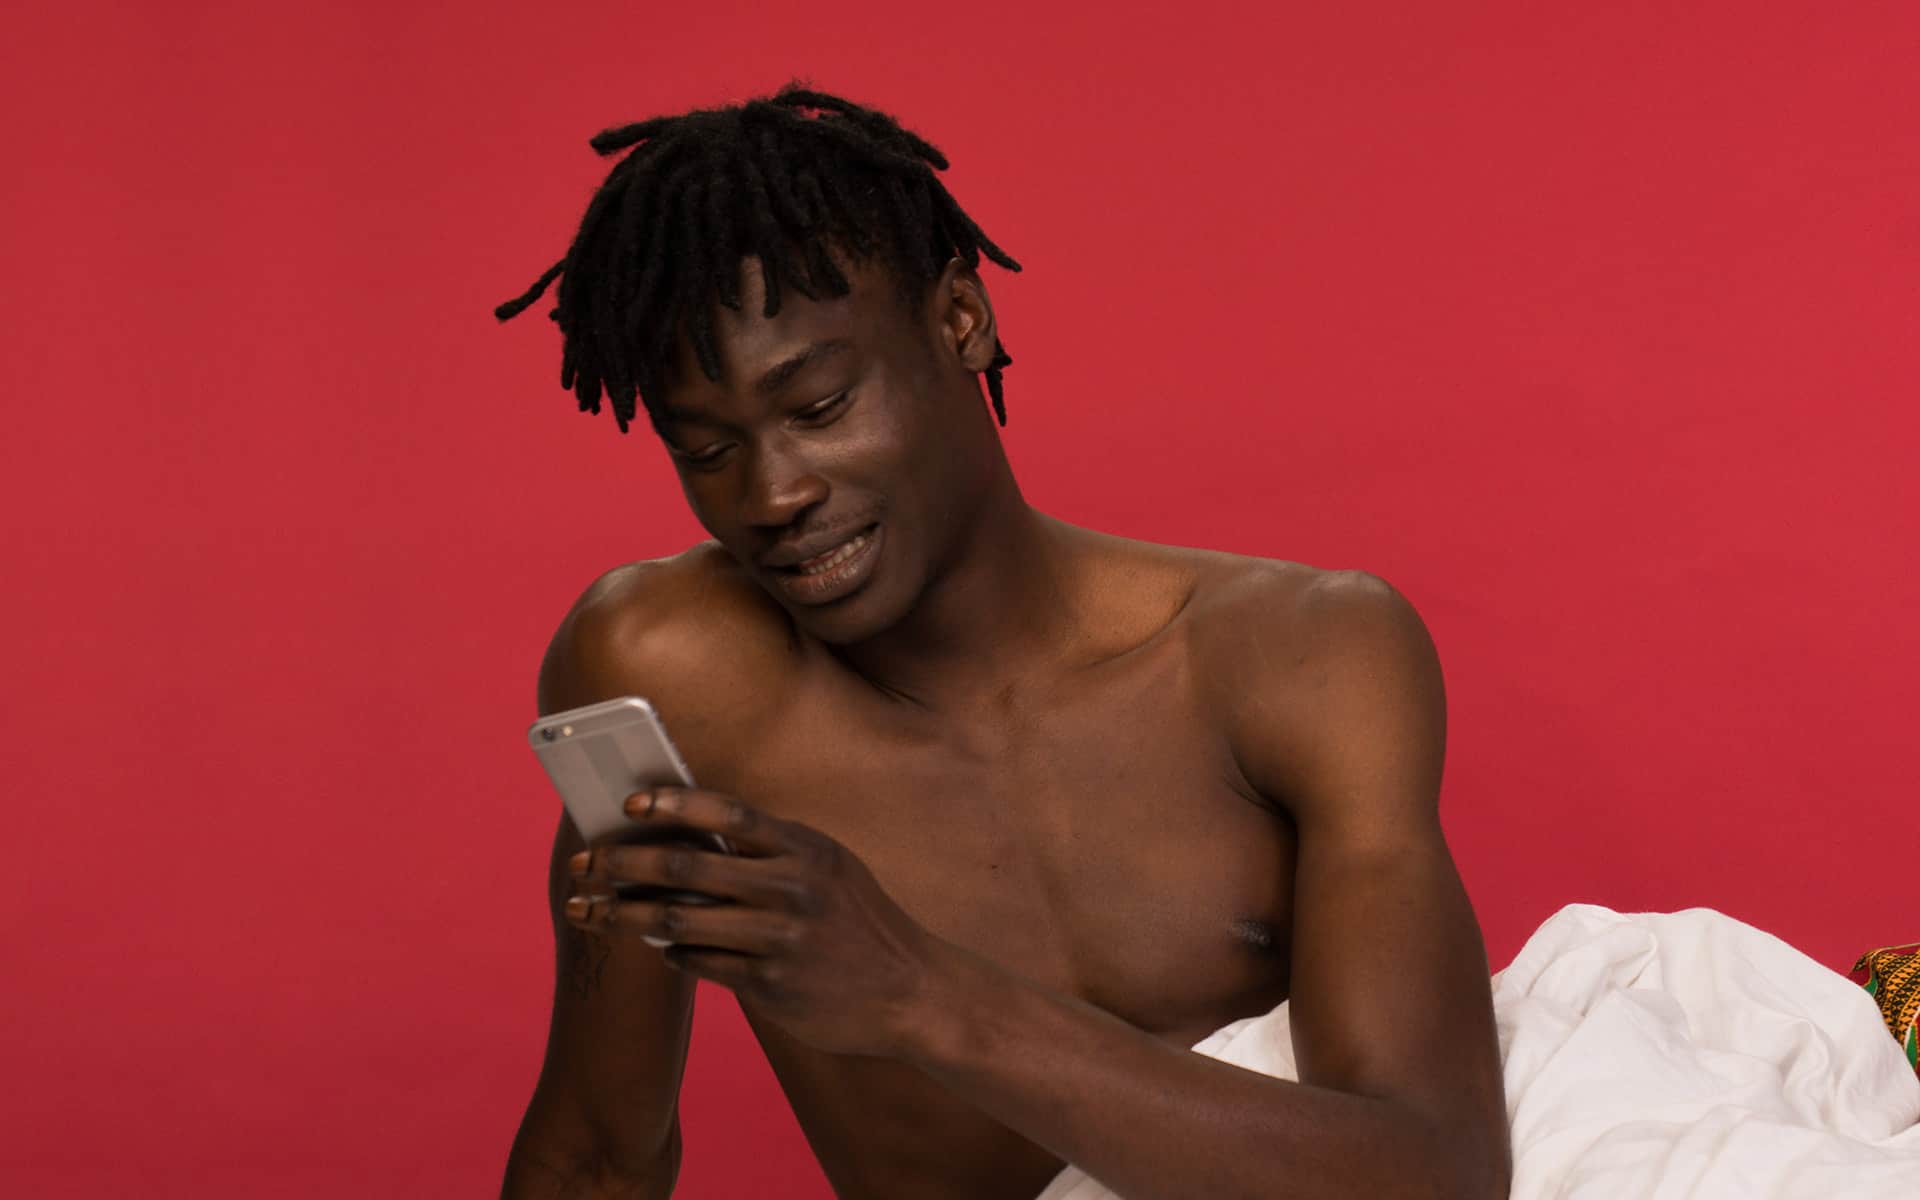 Man in bed alone, smiling at his phone 